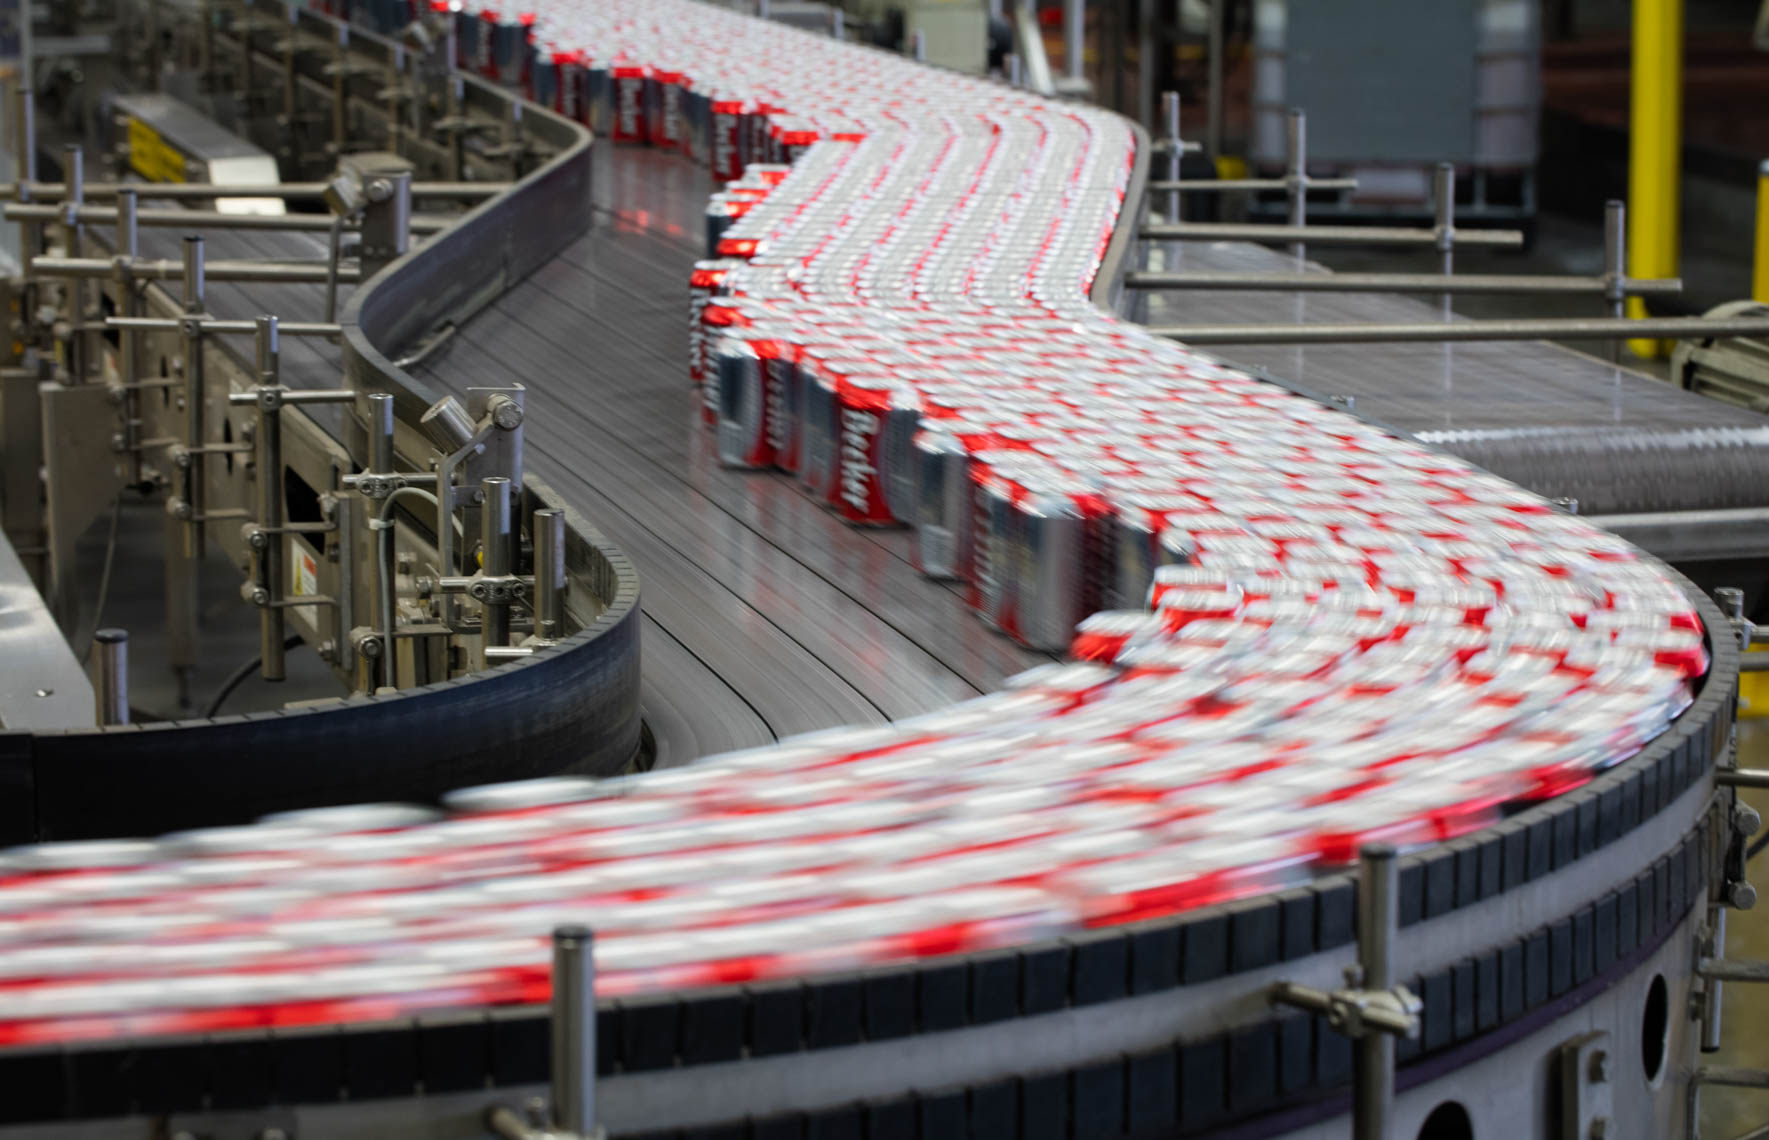 Beer Cans on a Brewery Conveyor Belt